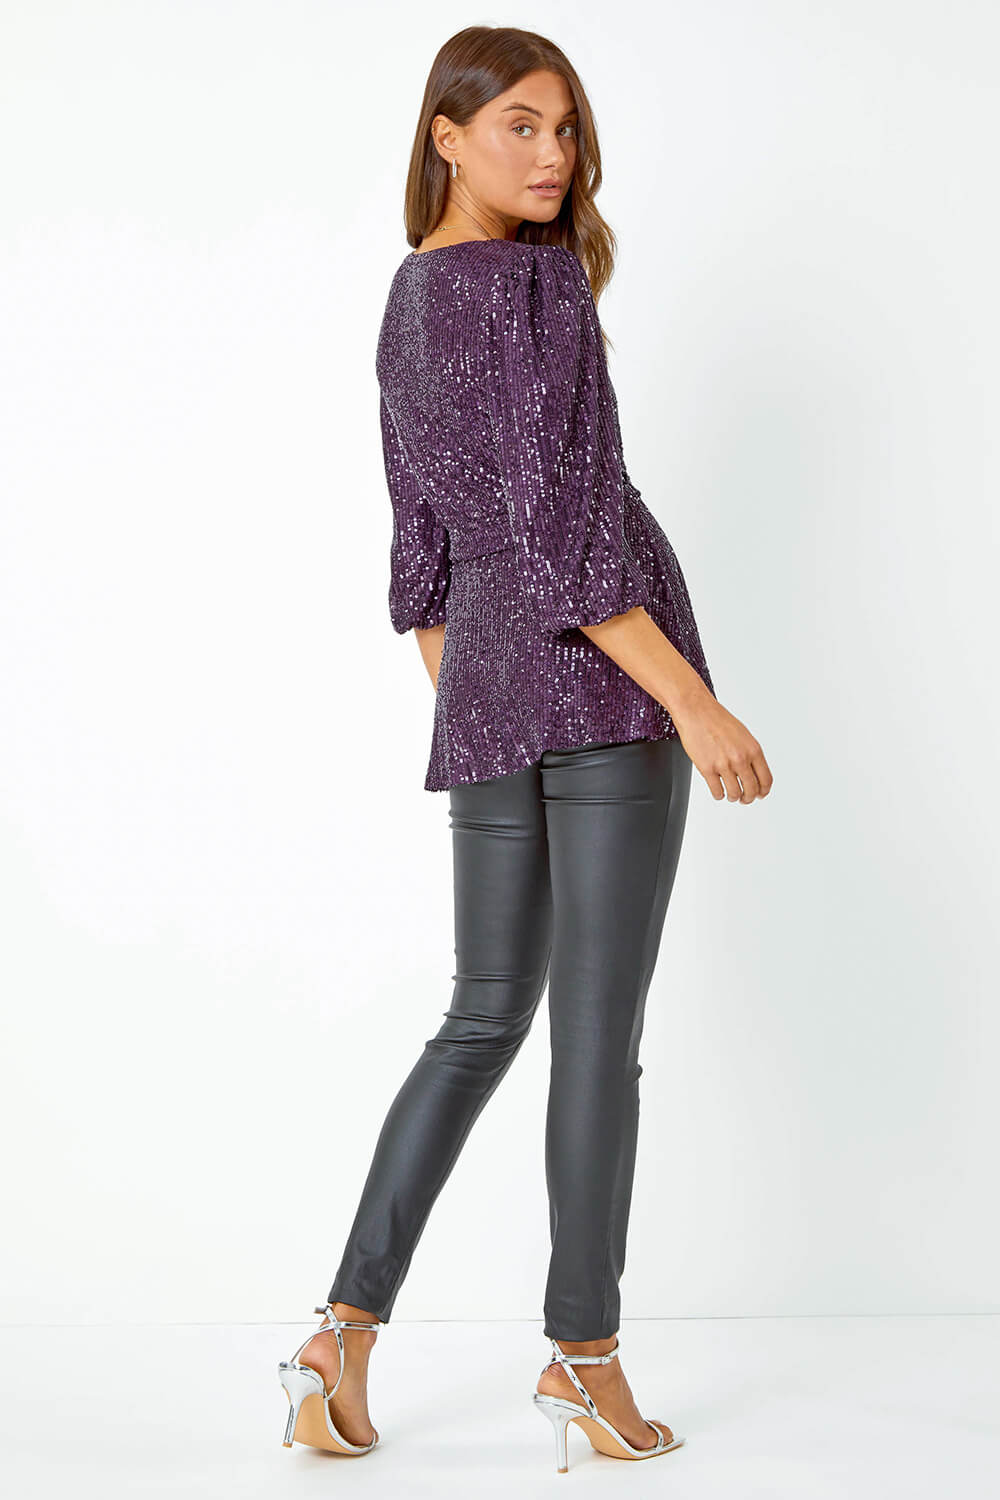 Purple Embellished Sequin Stretch Wrap Top, Image 3 of 5